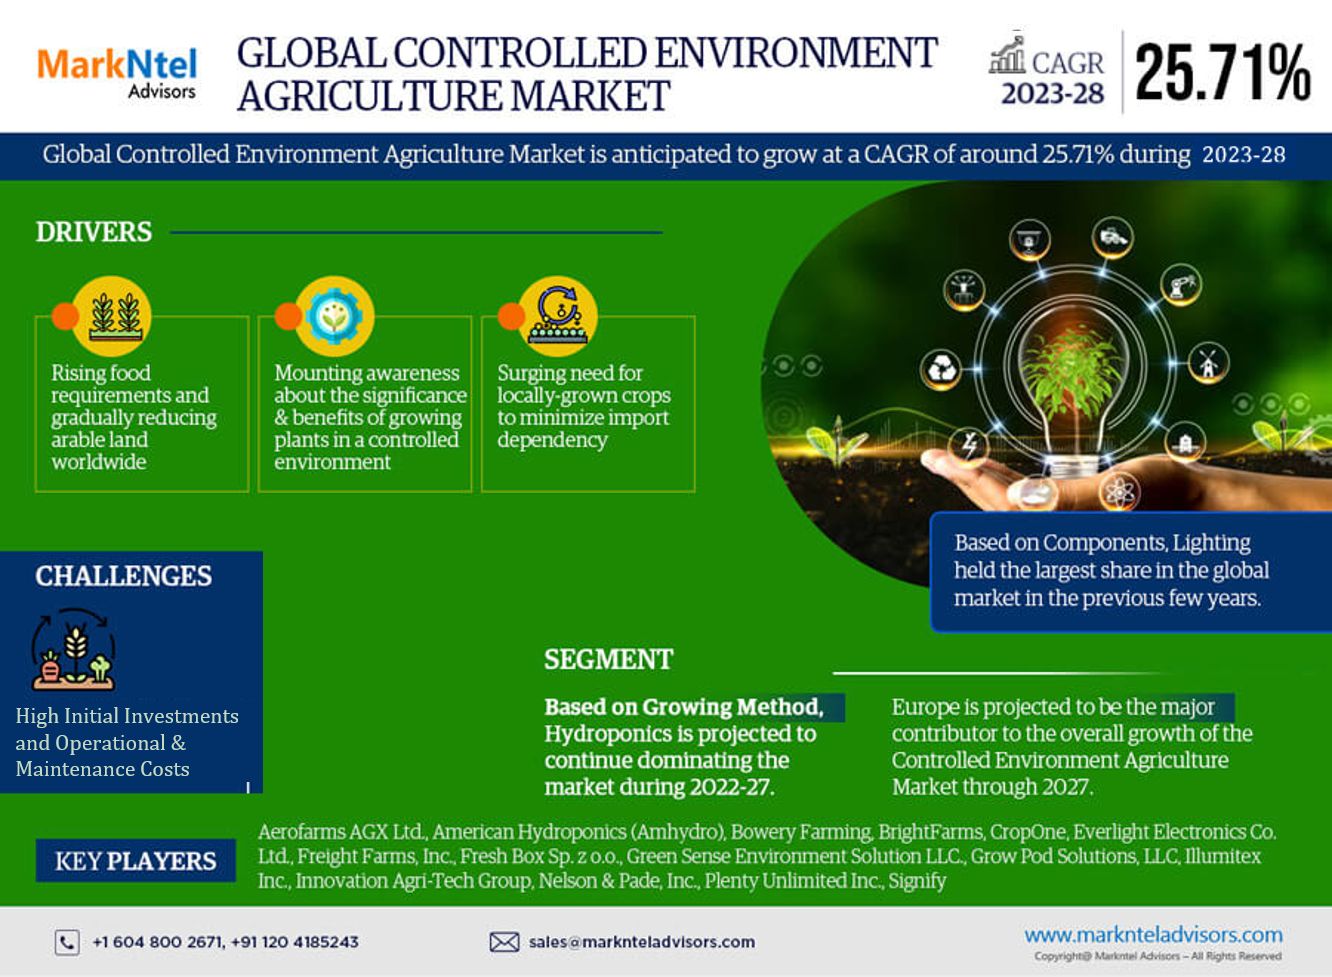 Controlled Environment Agriculture Market